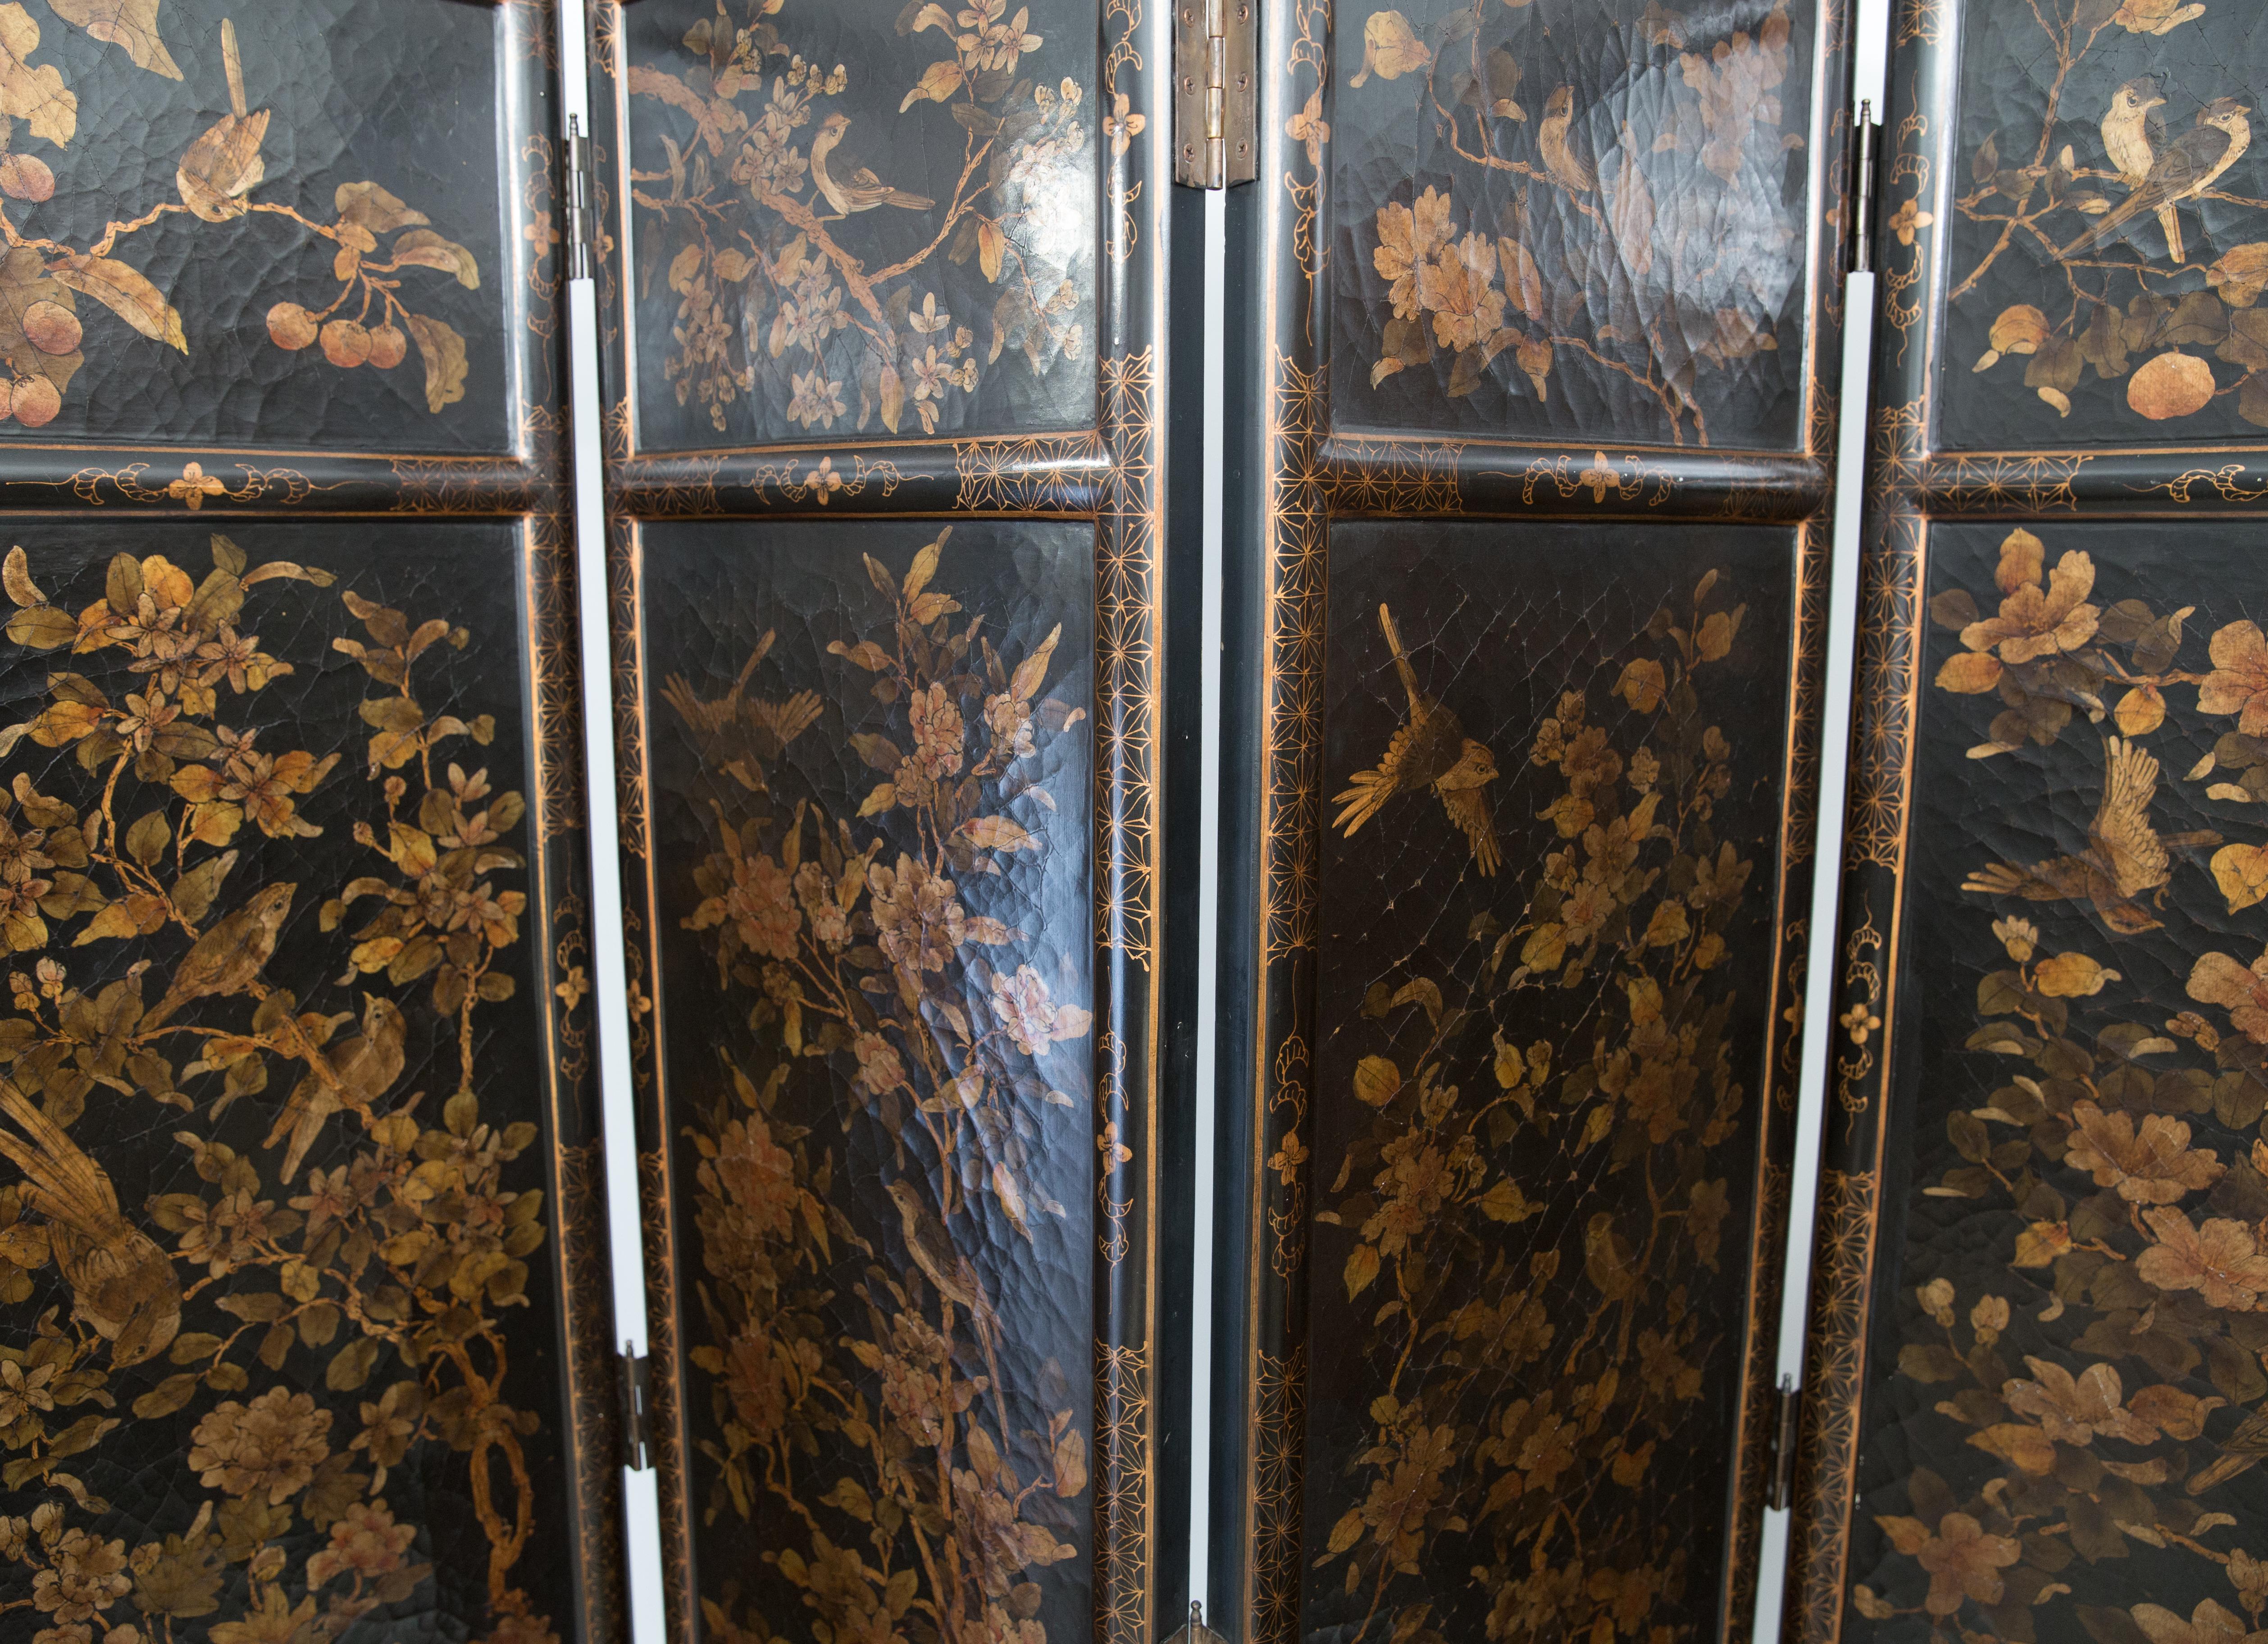 Offered is a Meiji Japanese screen that was created using paintings were likely quite older than the screen itself, which dates circa 1910. The canvas panels mounted within the screen are finely hand painted on canvas?(we cannot see backs without